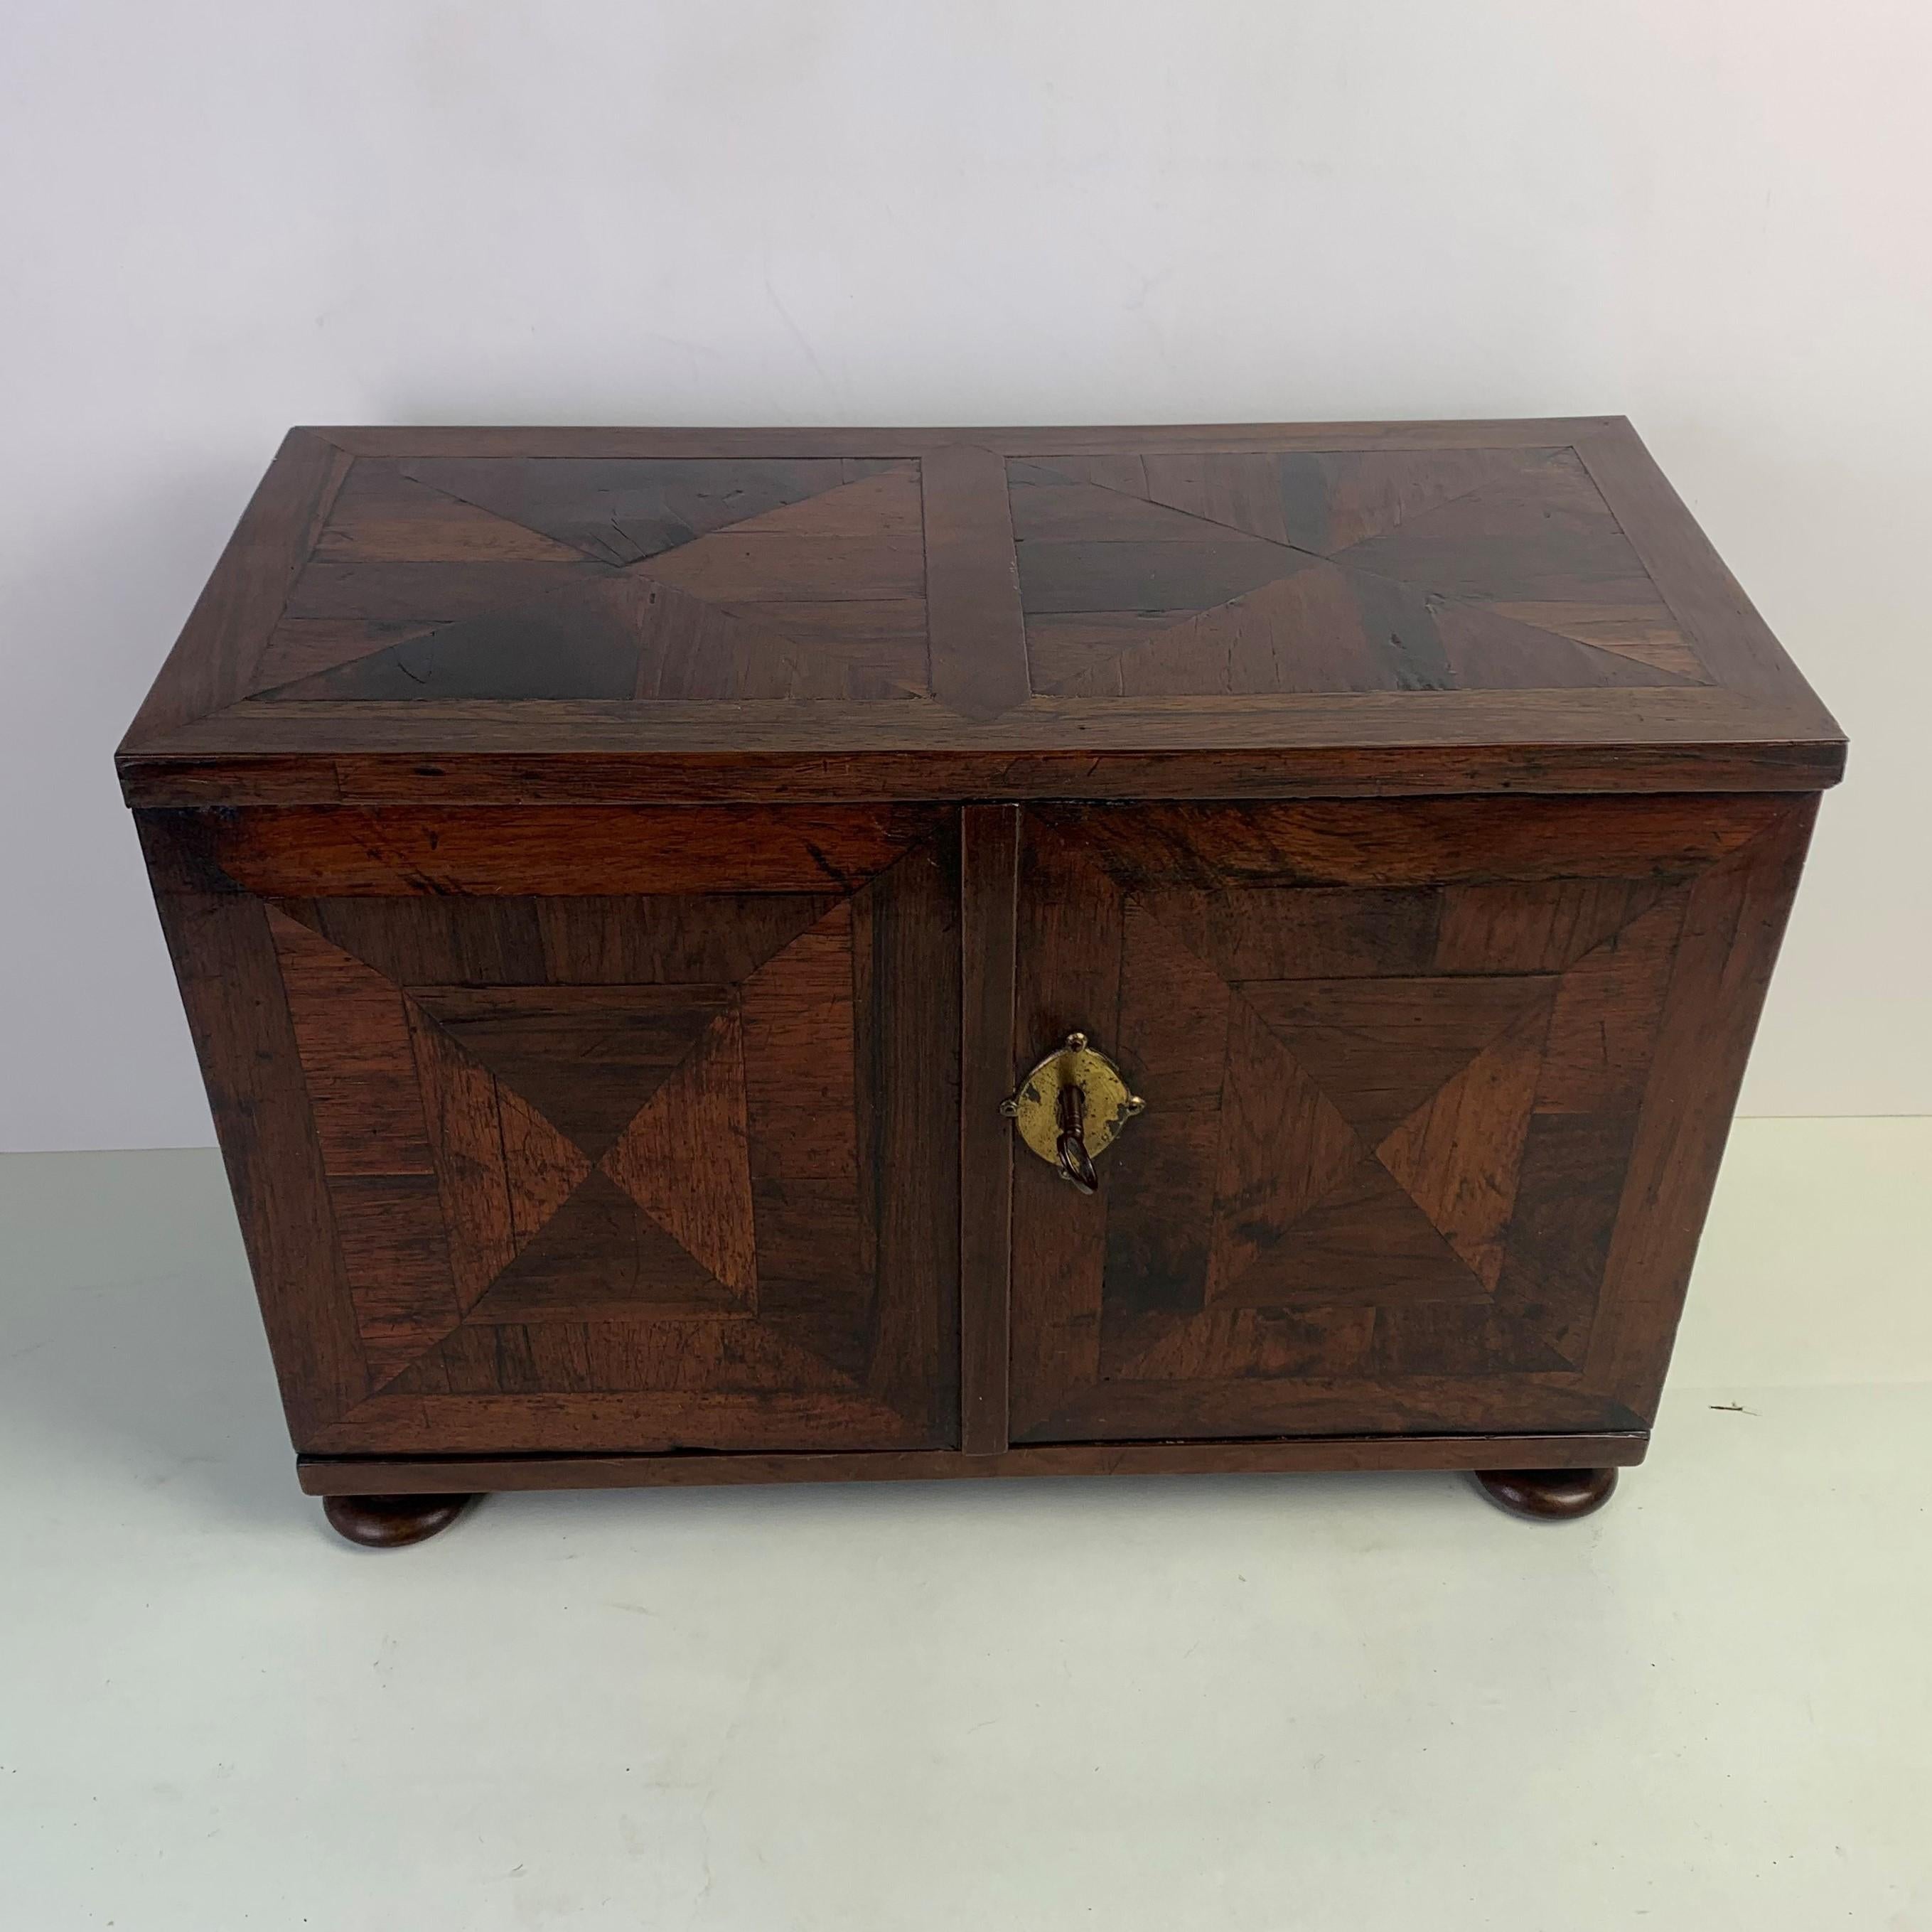 A rare, early 18th cenury parquetry table top spice cabinet unusually veneered in rosewood set in a geometric pattern. The two doors opening to reveal an arrangement of seven drawers and matching rosewood veneers to the insides of the